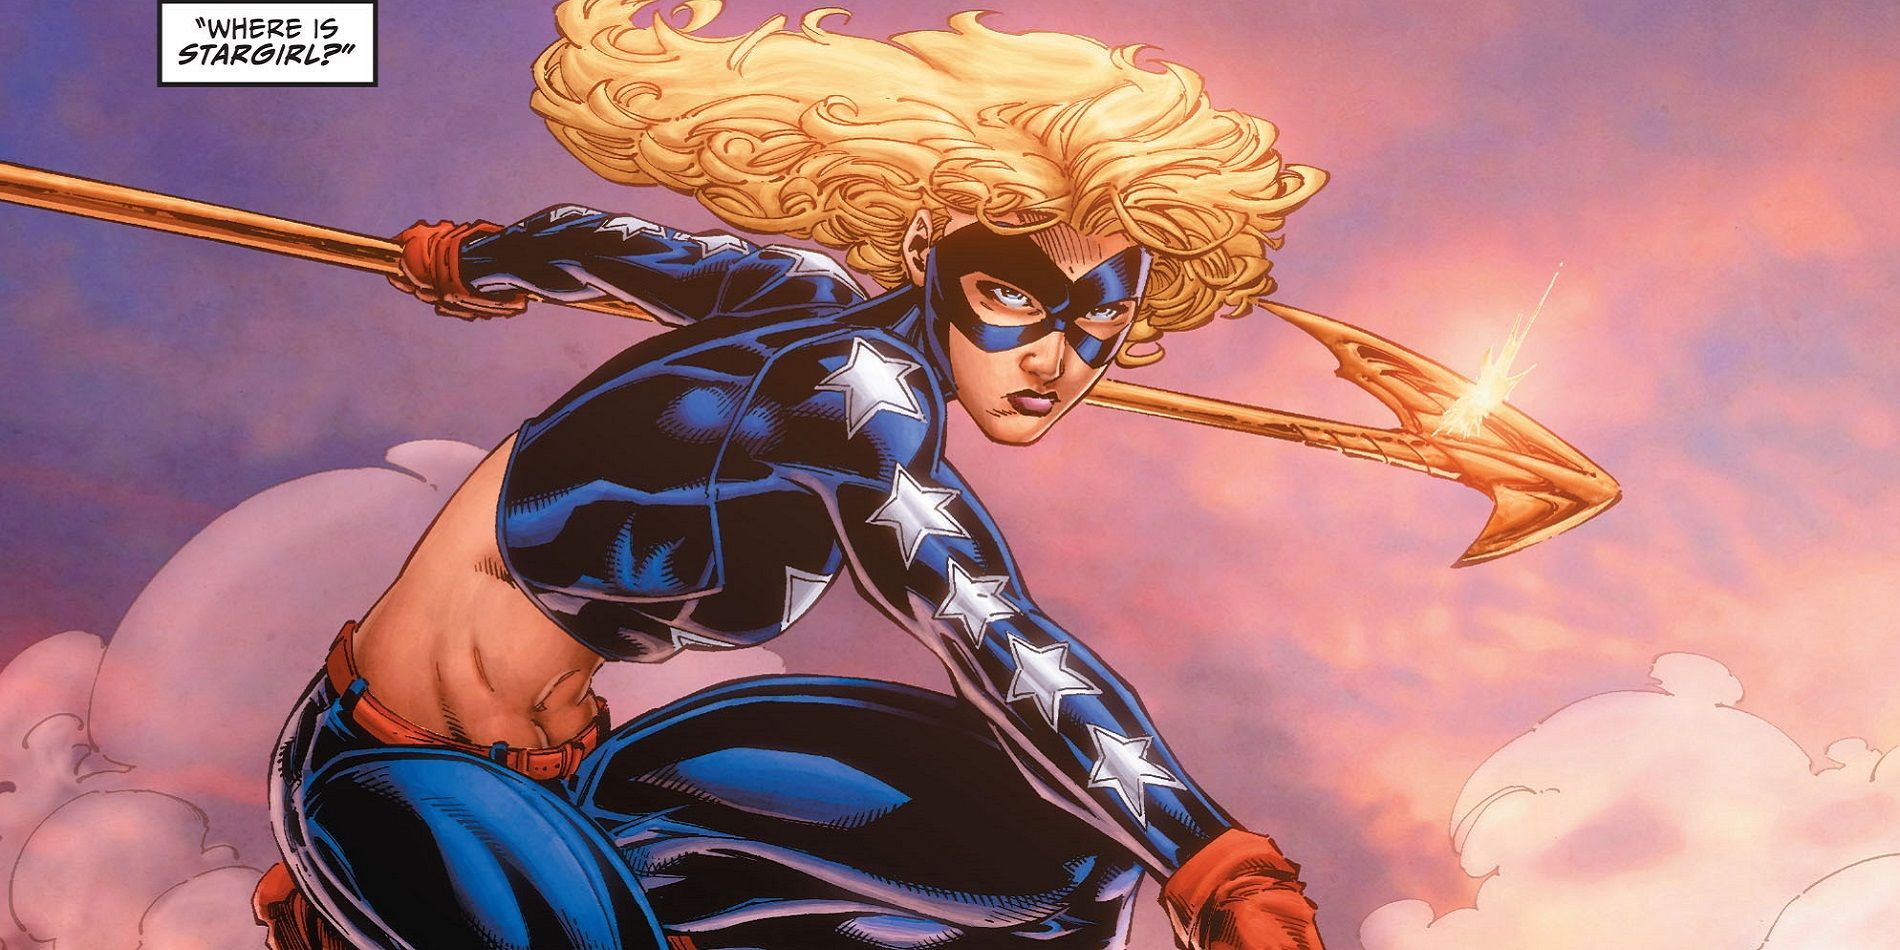 Courtney Whitmore as Stargirl in DC Comics